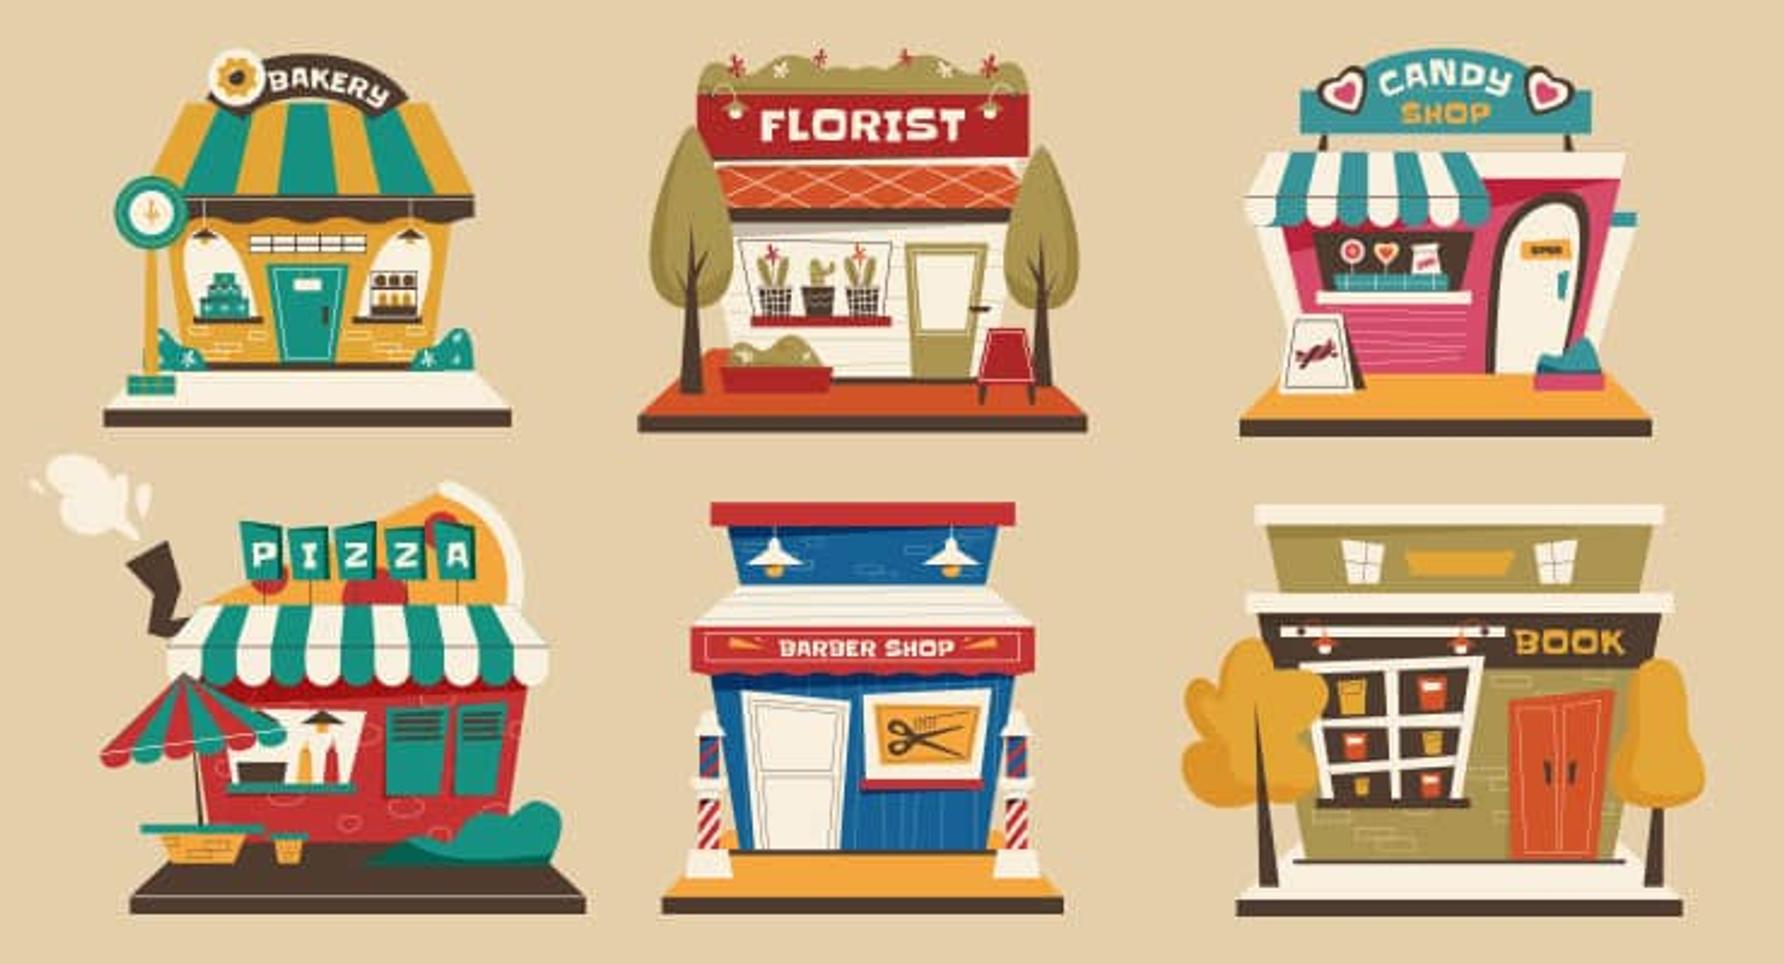 Drawings of different types of local businesses